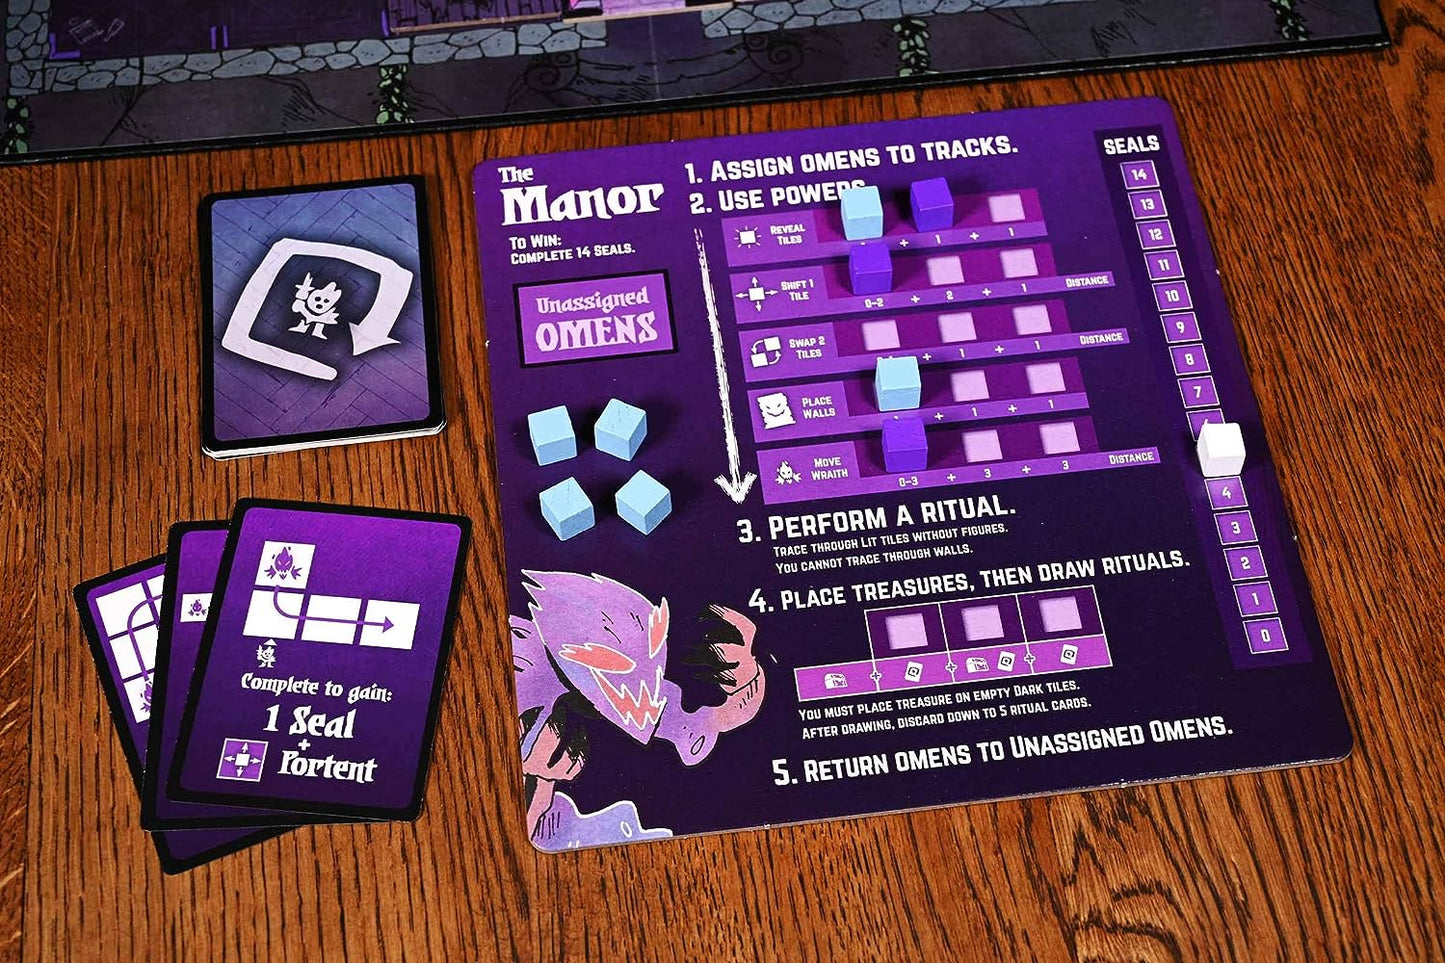 Vast: The Mysterious Manor (Standalone Game)